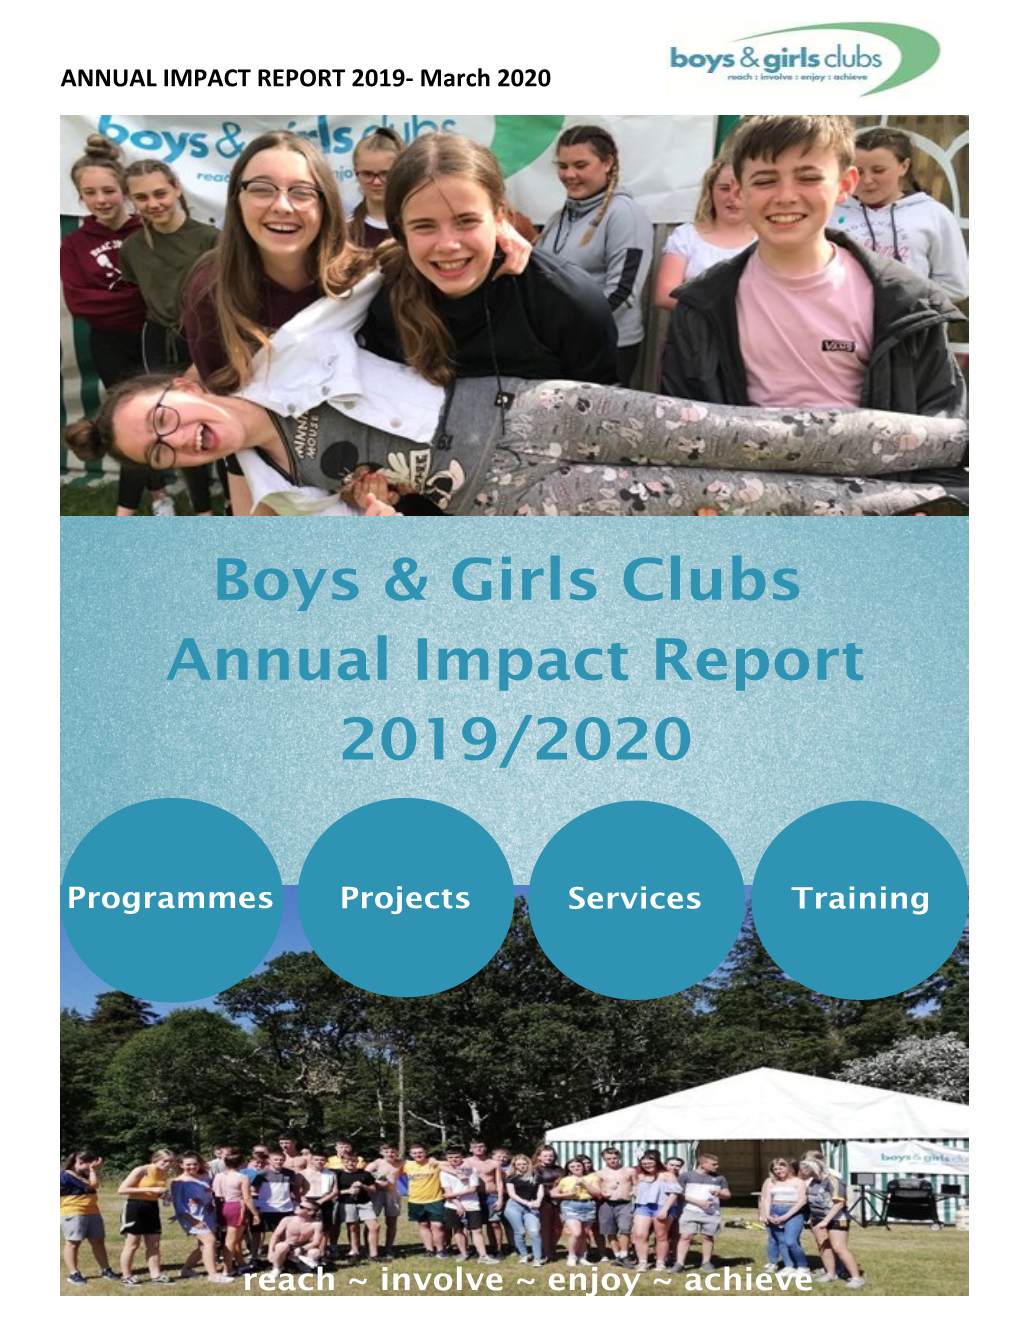 Boys & Girls Clubs Annual Impact Report 2019/2020